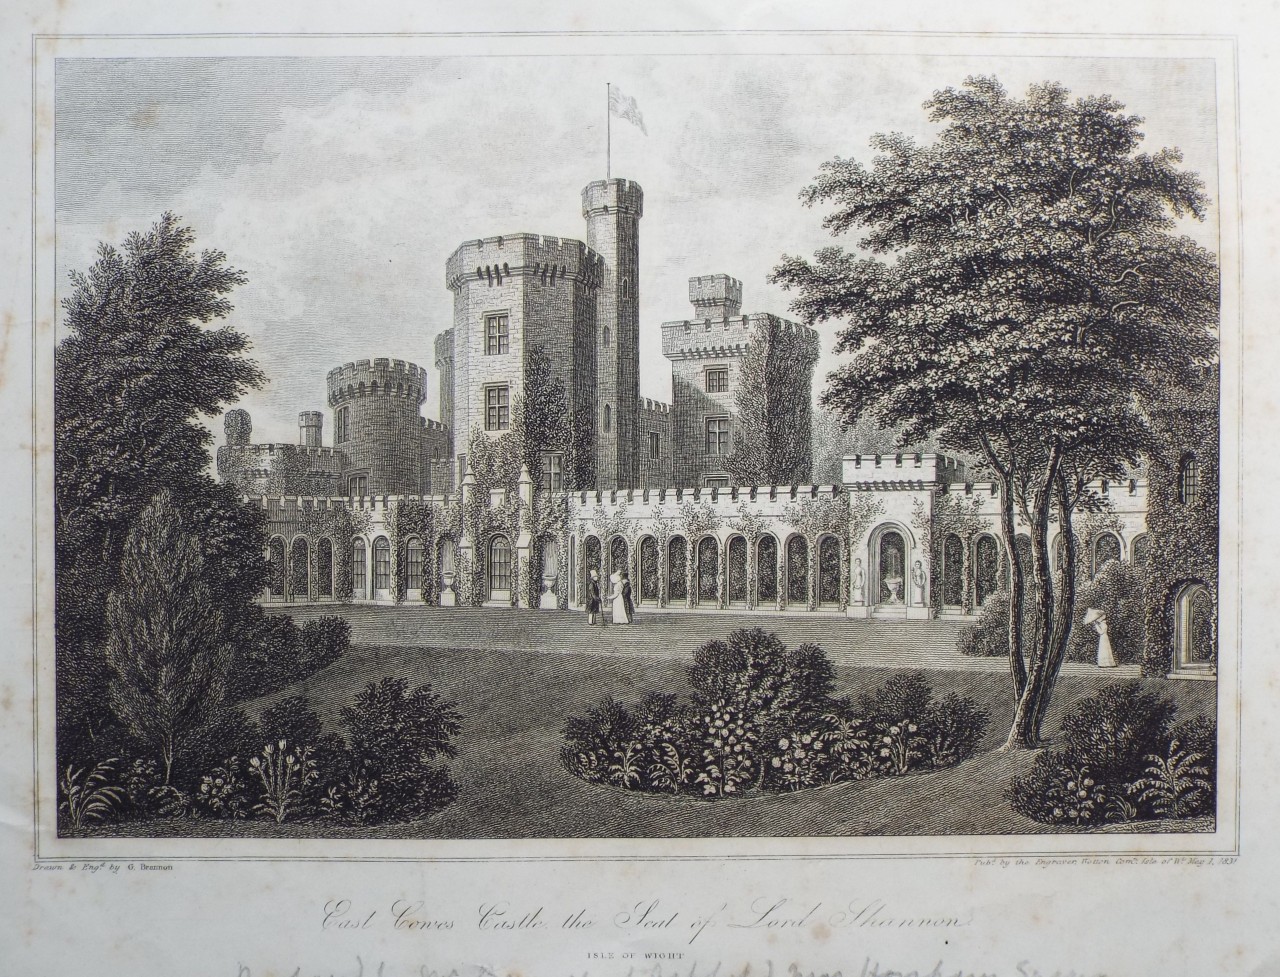 Print - East Cowes Castle, the Seat of Lord Shannon, Isle of Wight, - Brannon